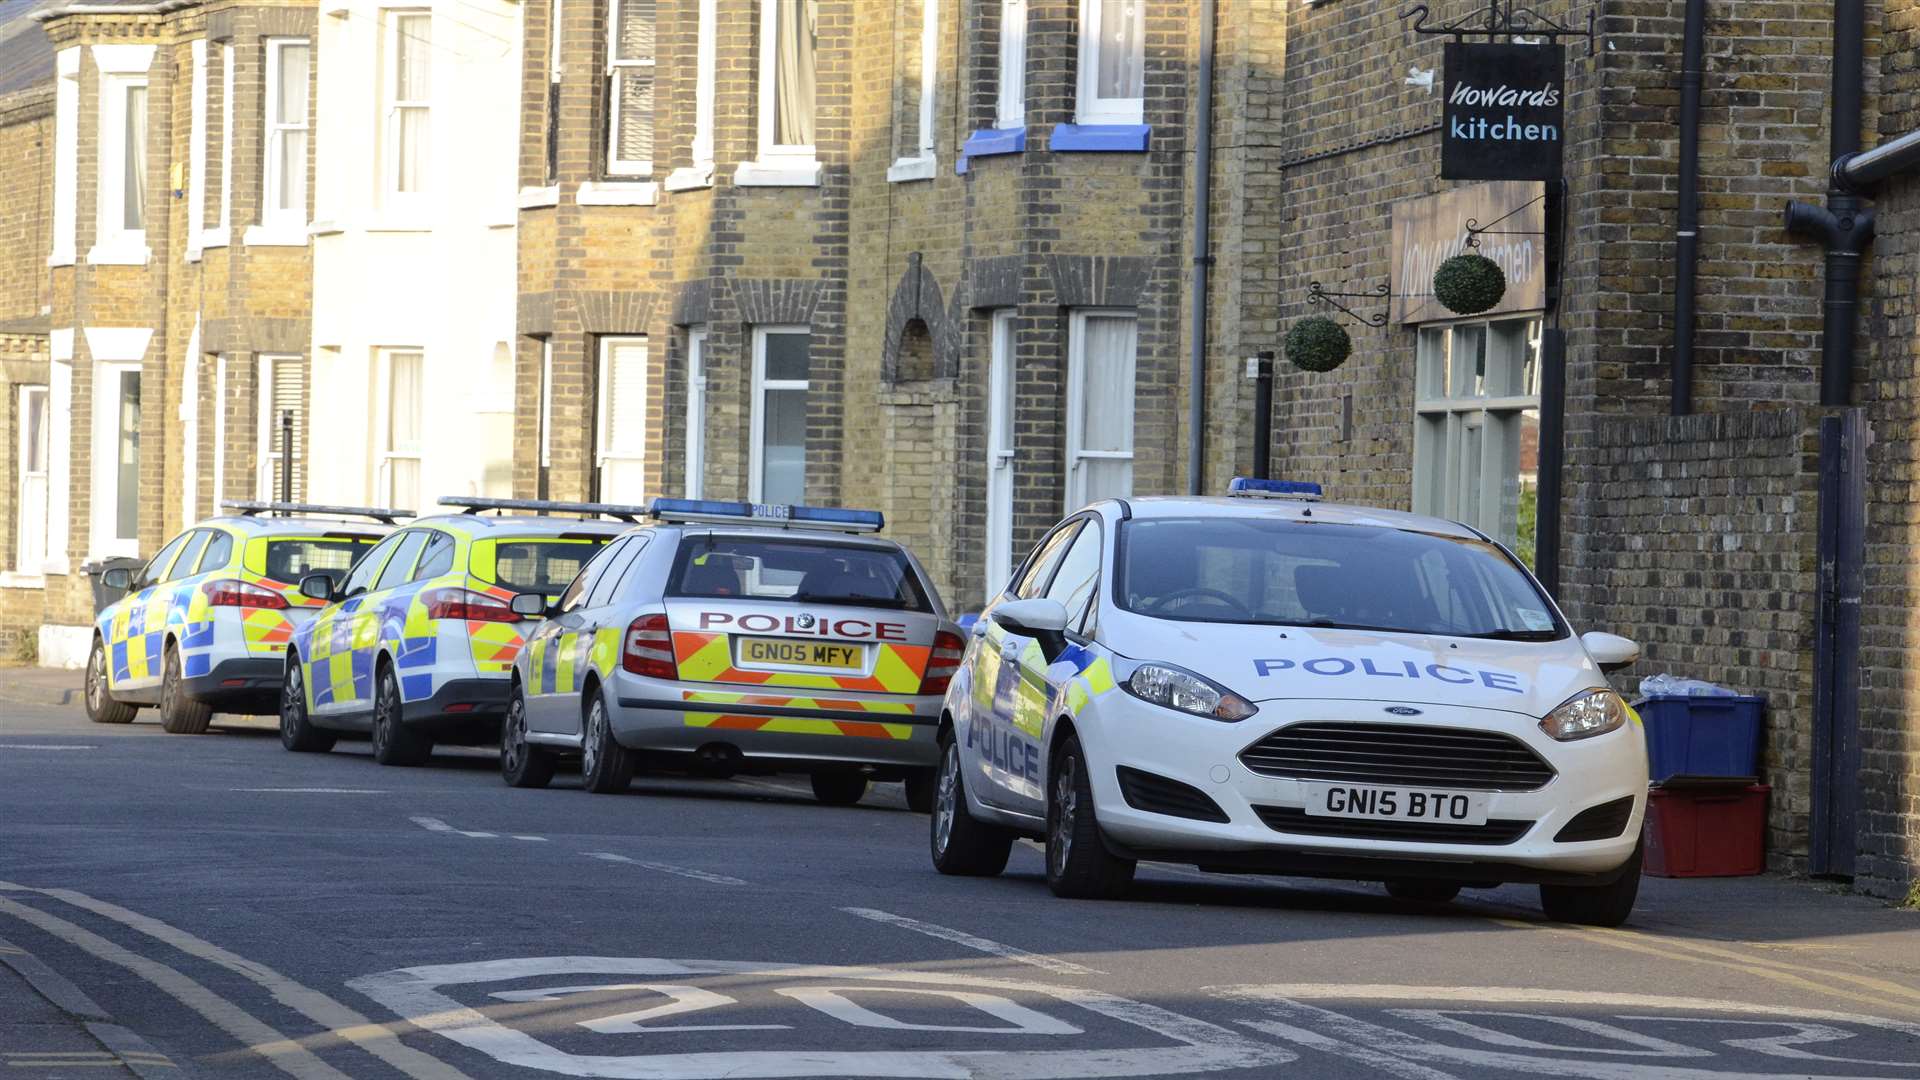 Several police cars responded to the incident. Picture: Chris Davey.